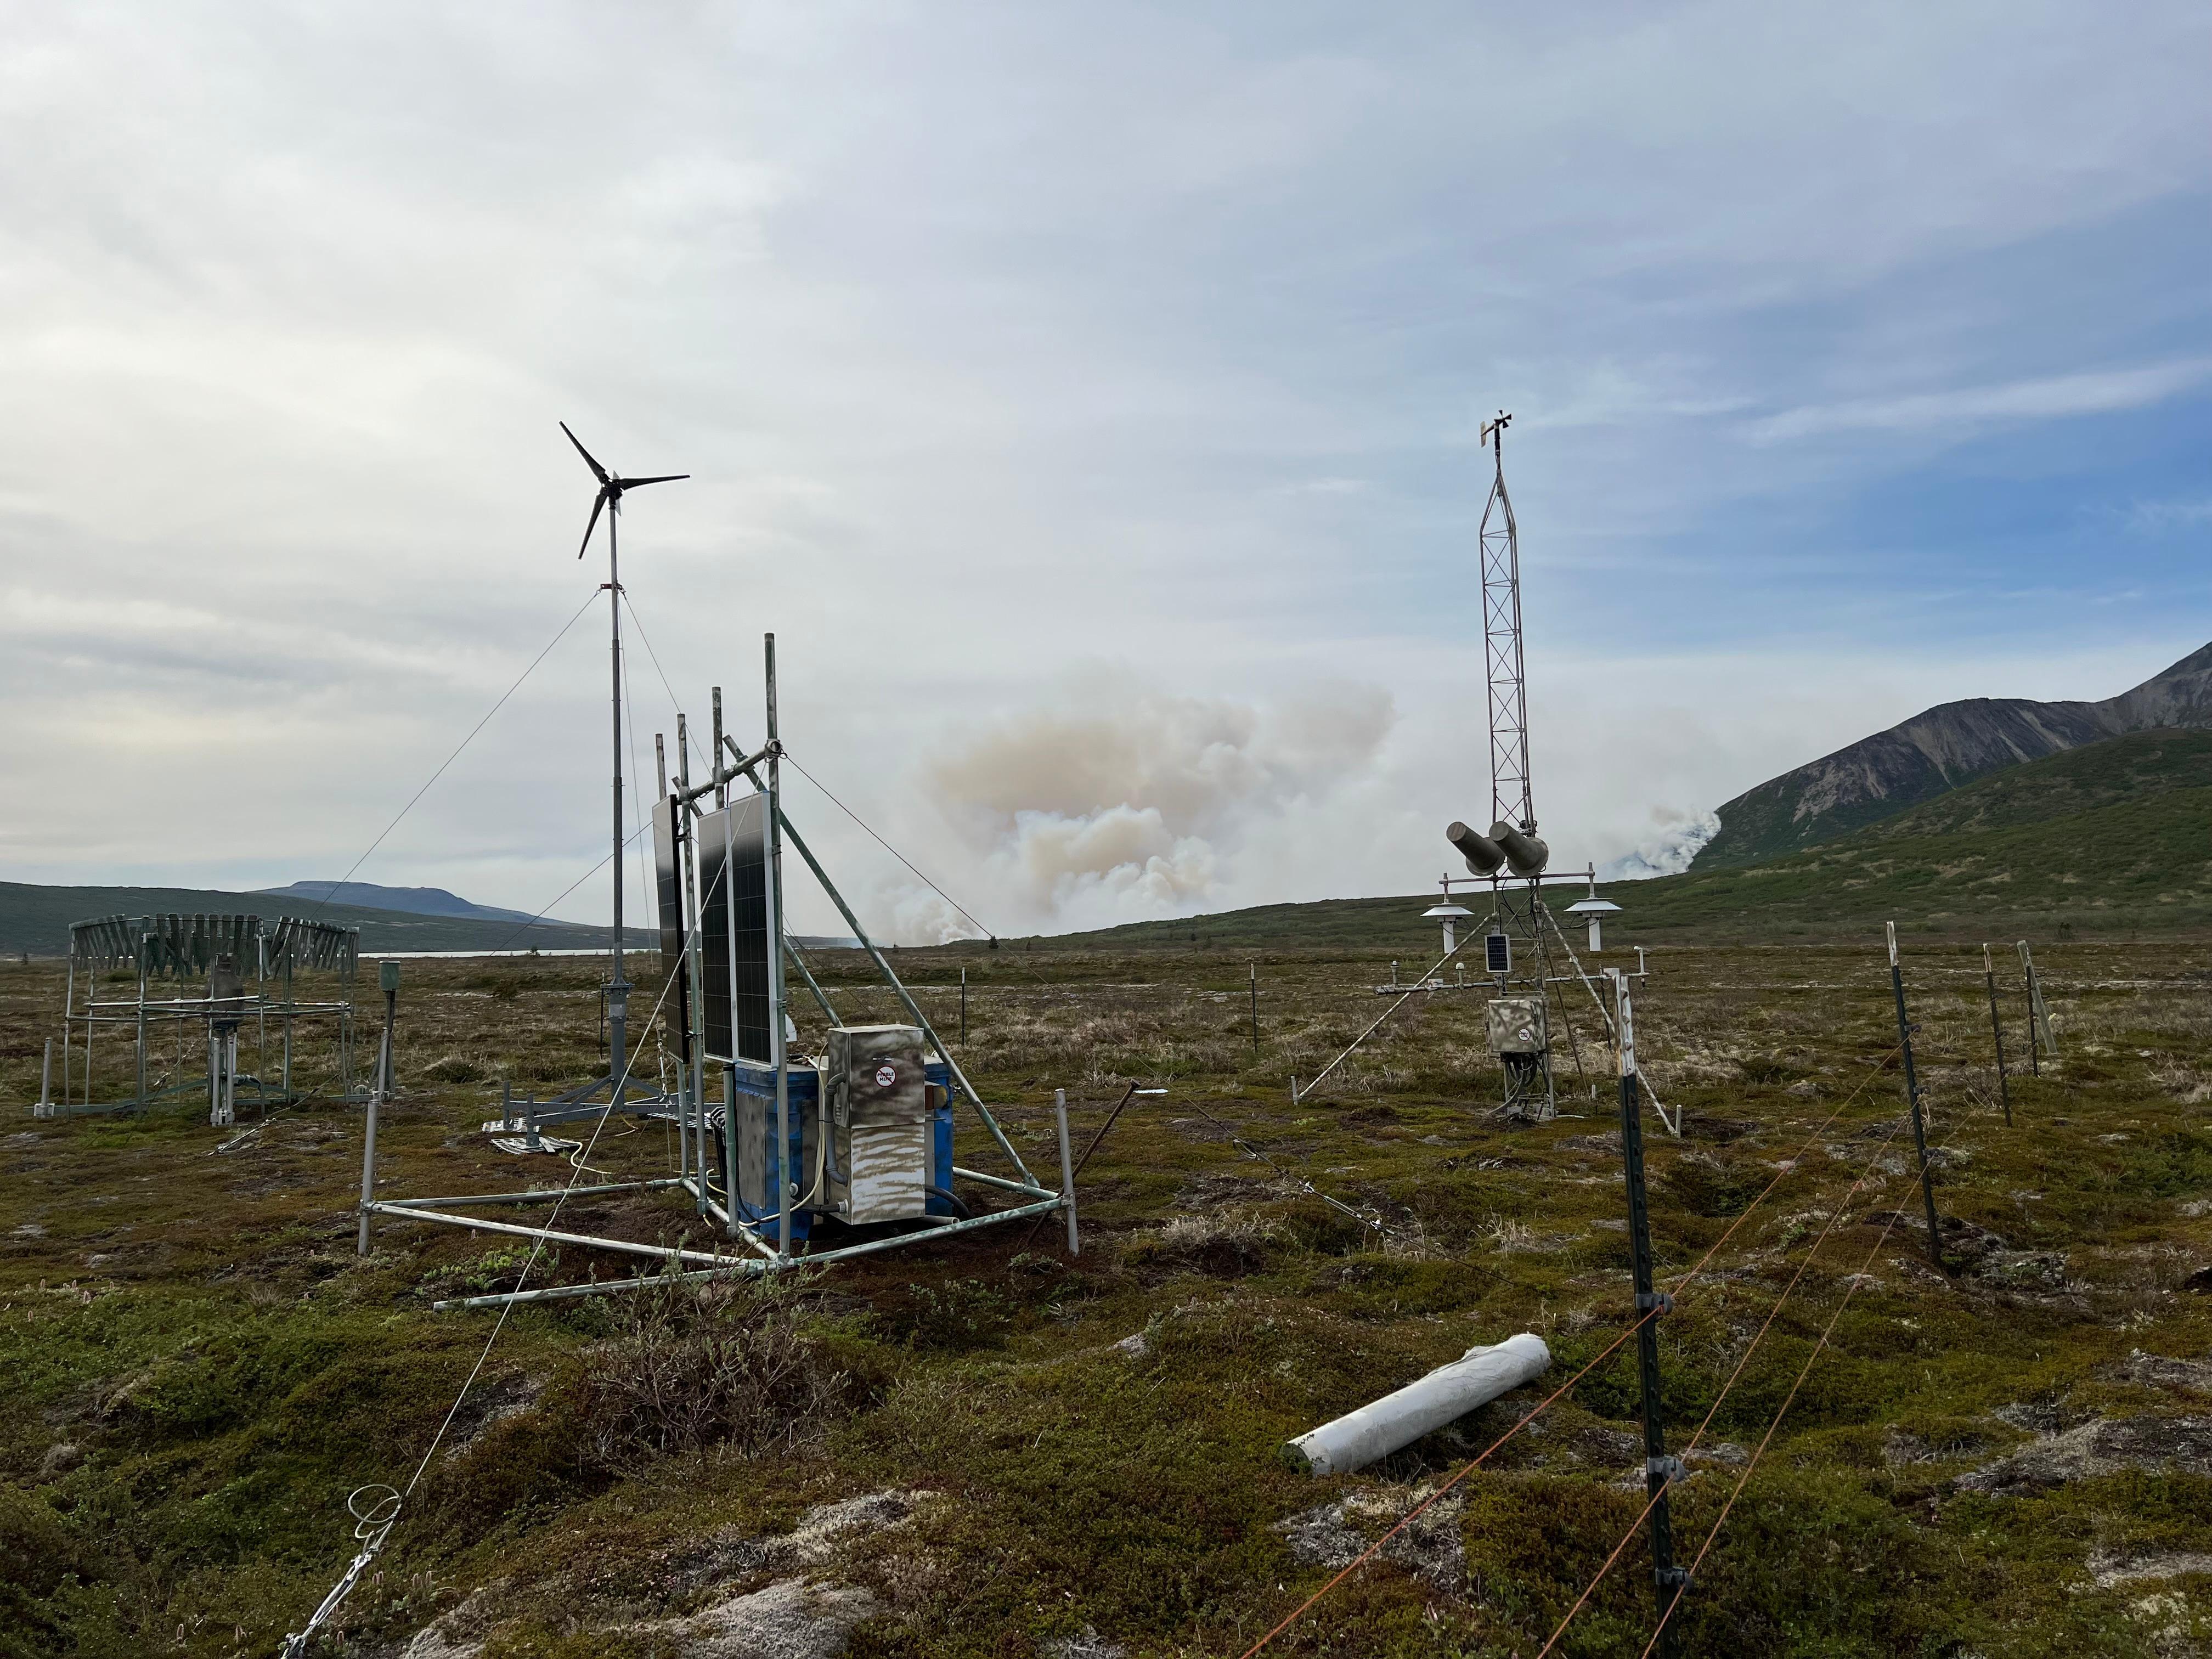 A Remote Automated Weather System (RAWS) in tundra